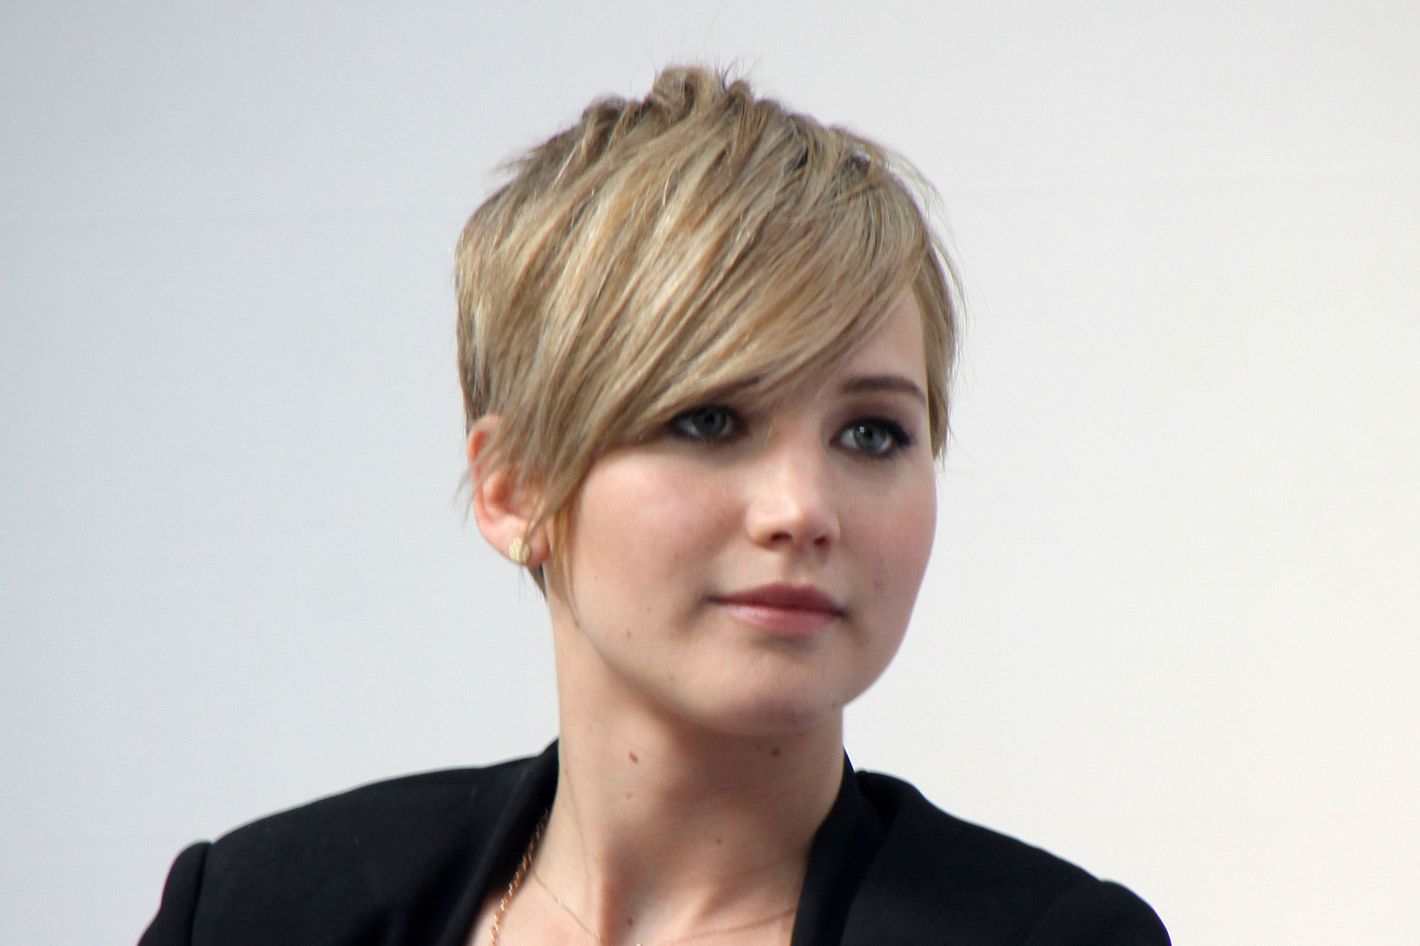 What A Pixie Cut Means When You're Not Famous